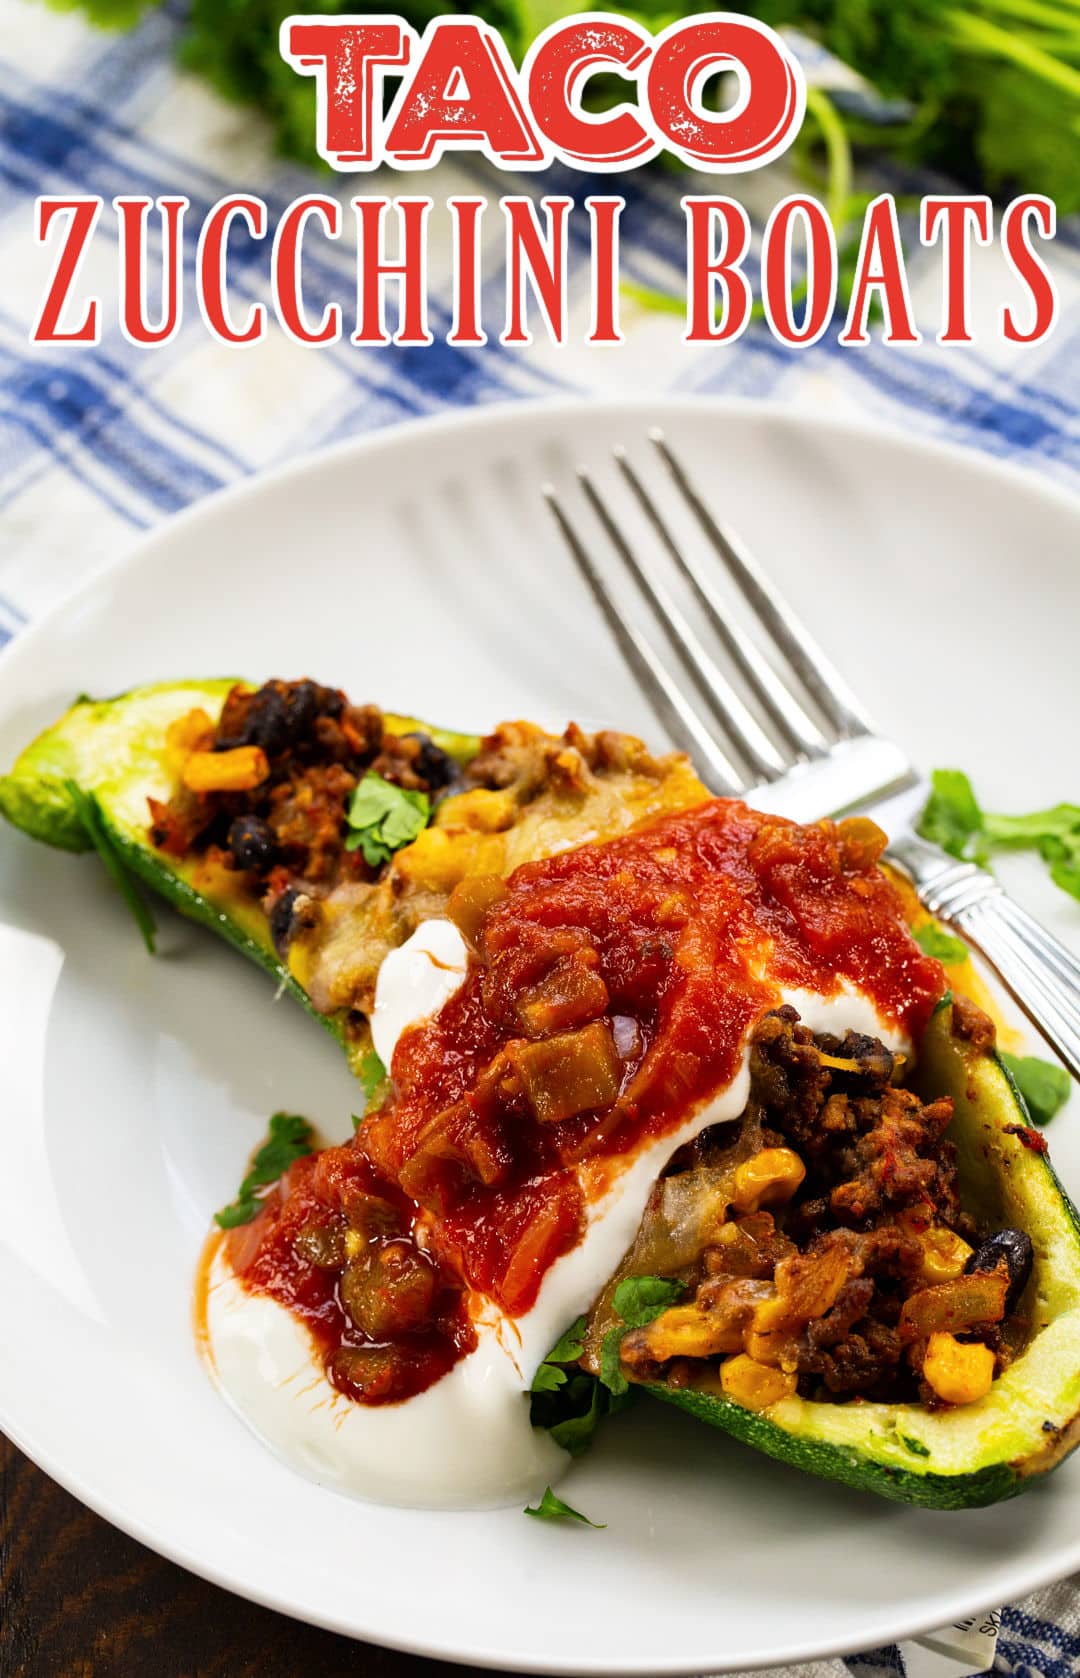 Taco Zucchini Boat topped with sour cream and salsa on a plate.